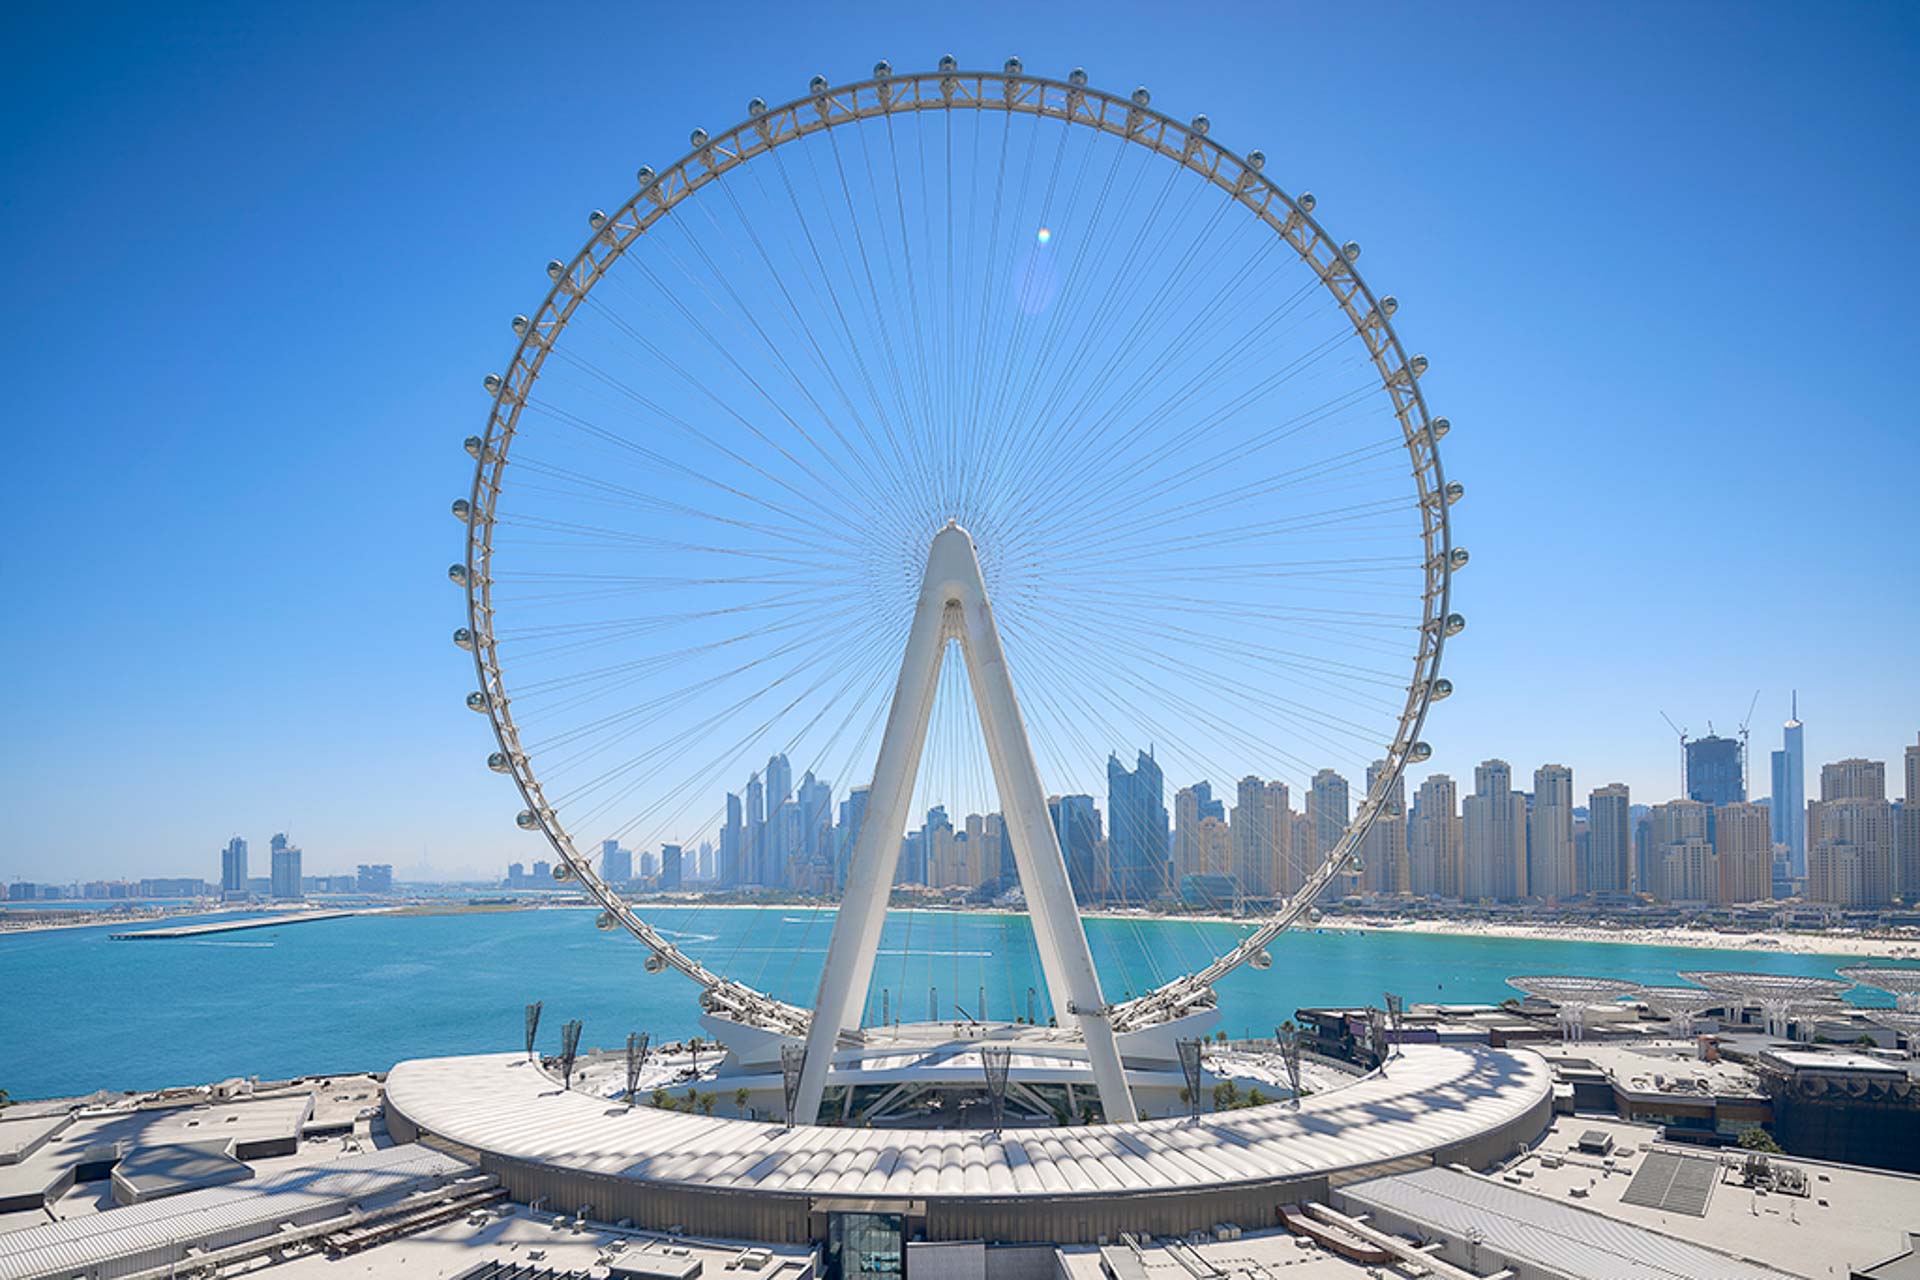 The massive Dubai ferris wheel and its large buildings in the background with a blue ski